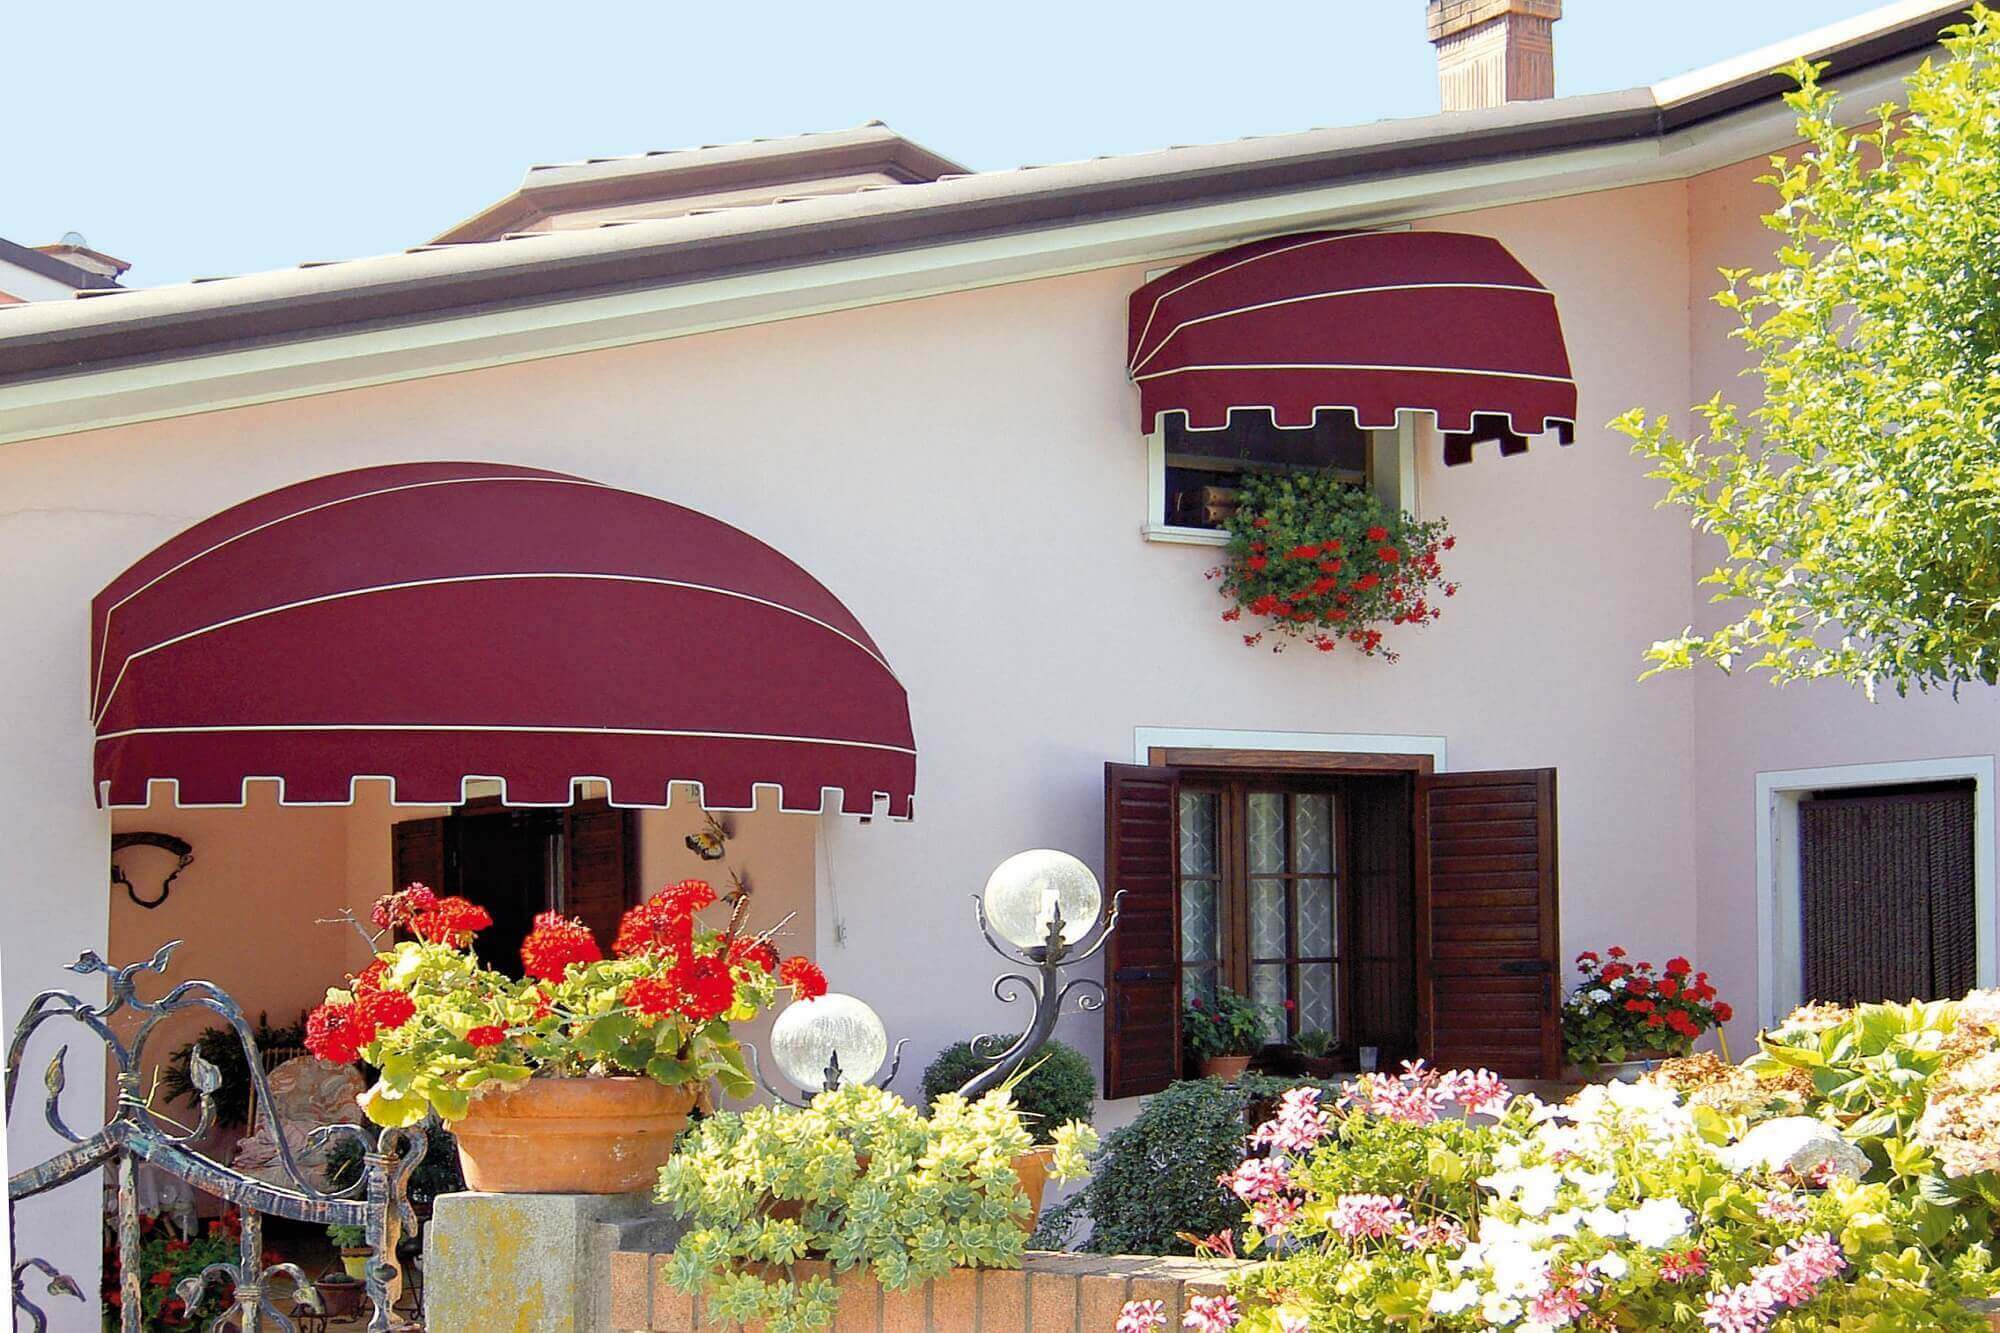 Canopy awnings by retractable awnings